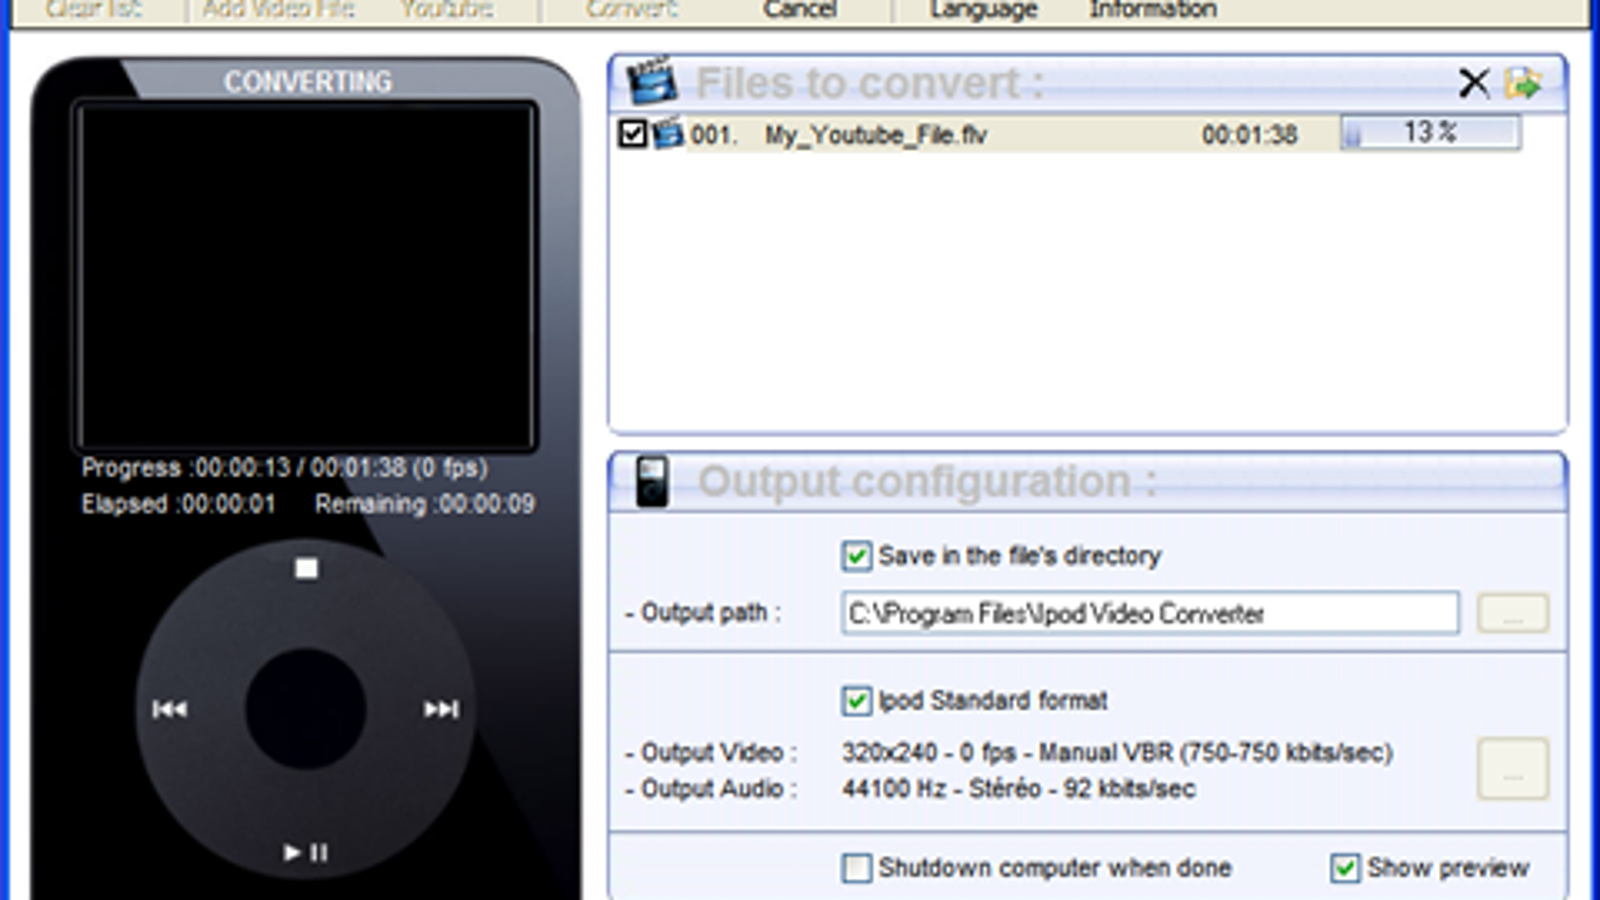 download the last version for ipod Guitar Pro 8.1.1.17